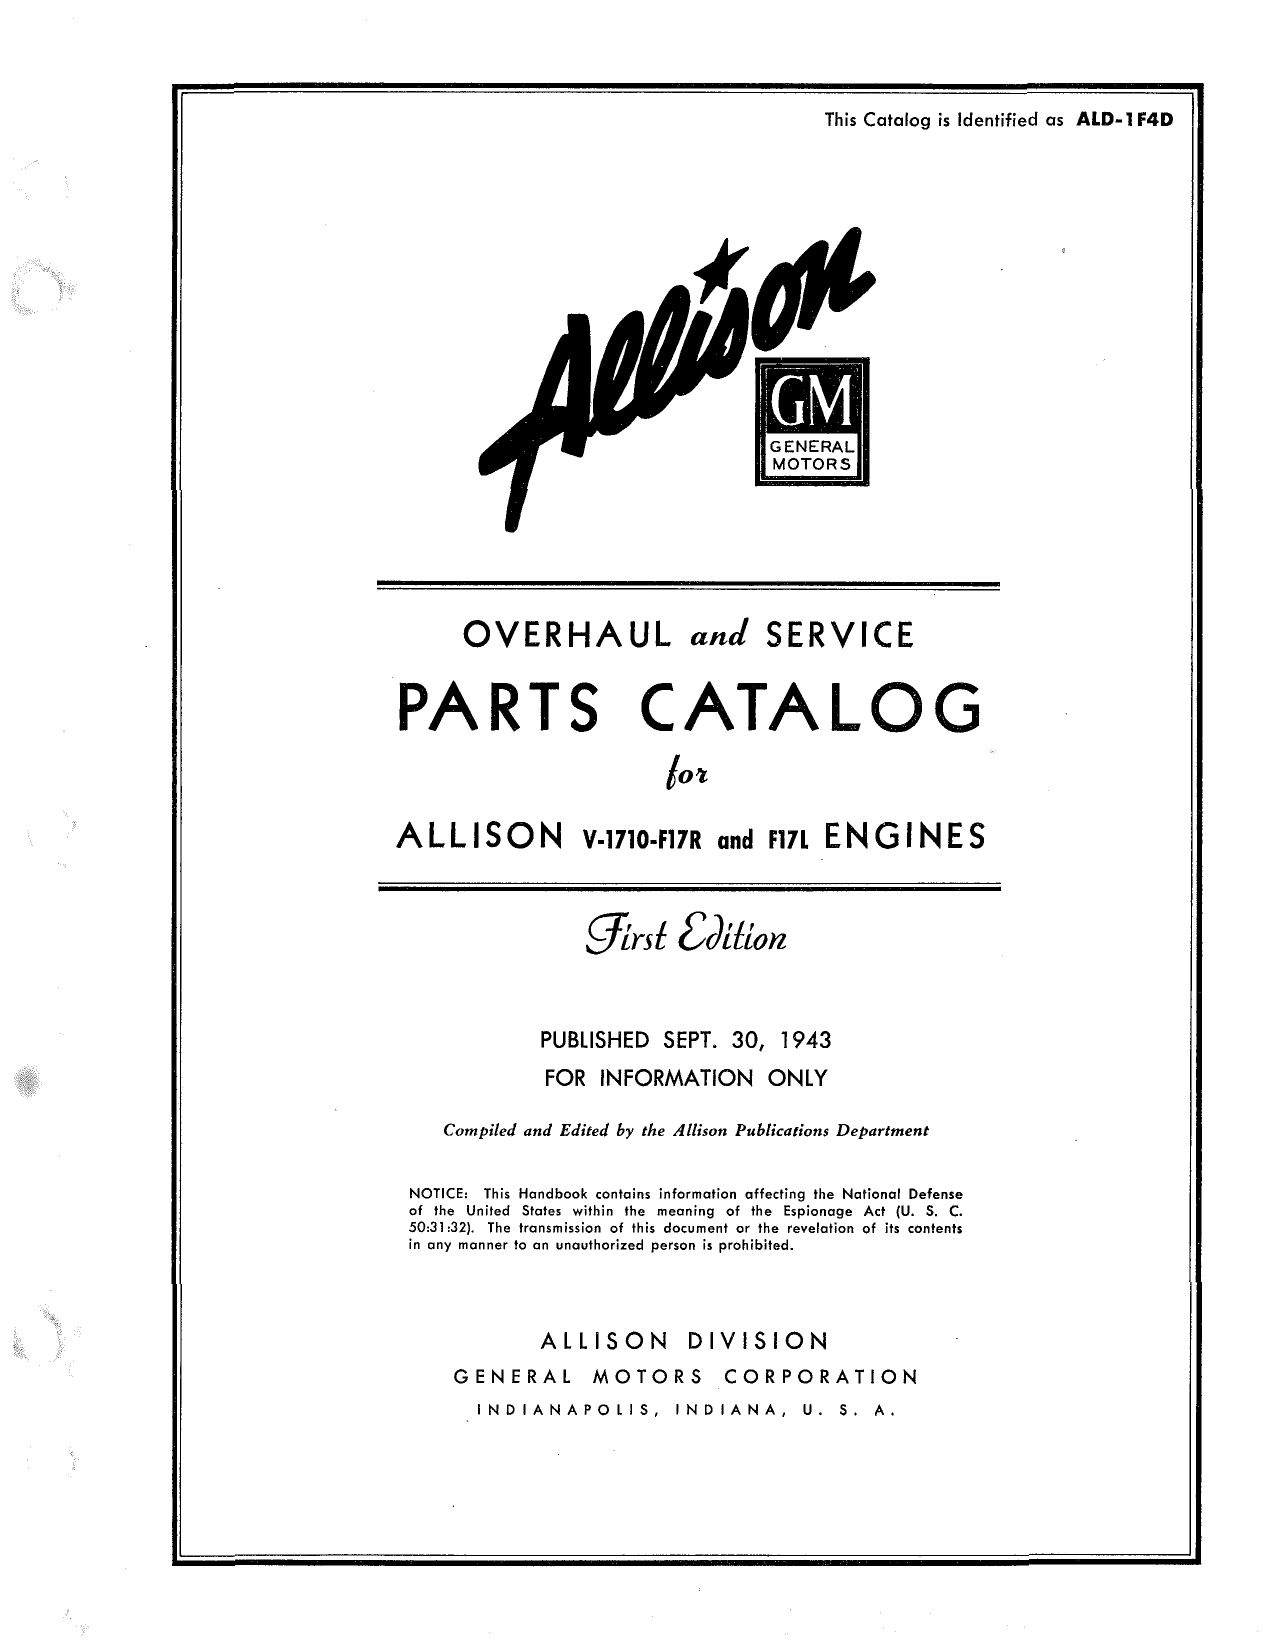 Sample page 1 from AirCorps Library document: Parts Catalog - Allison V-1710-F